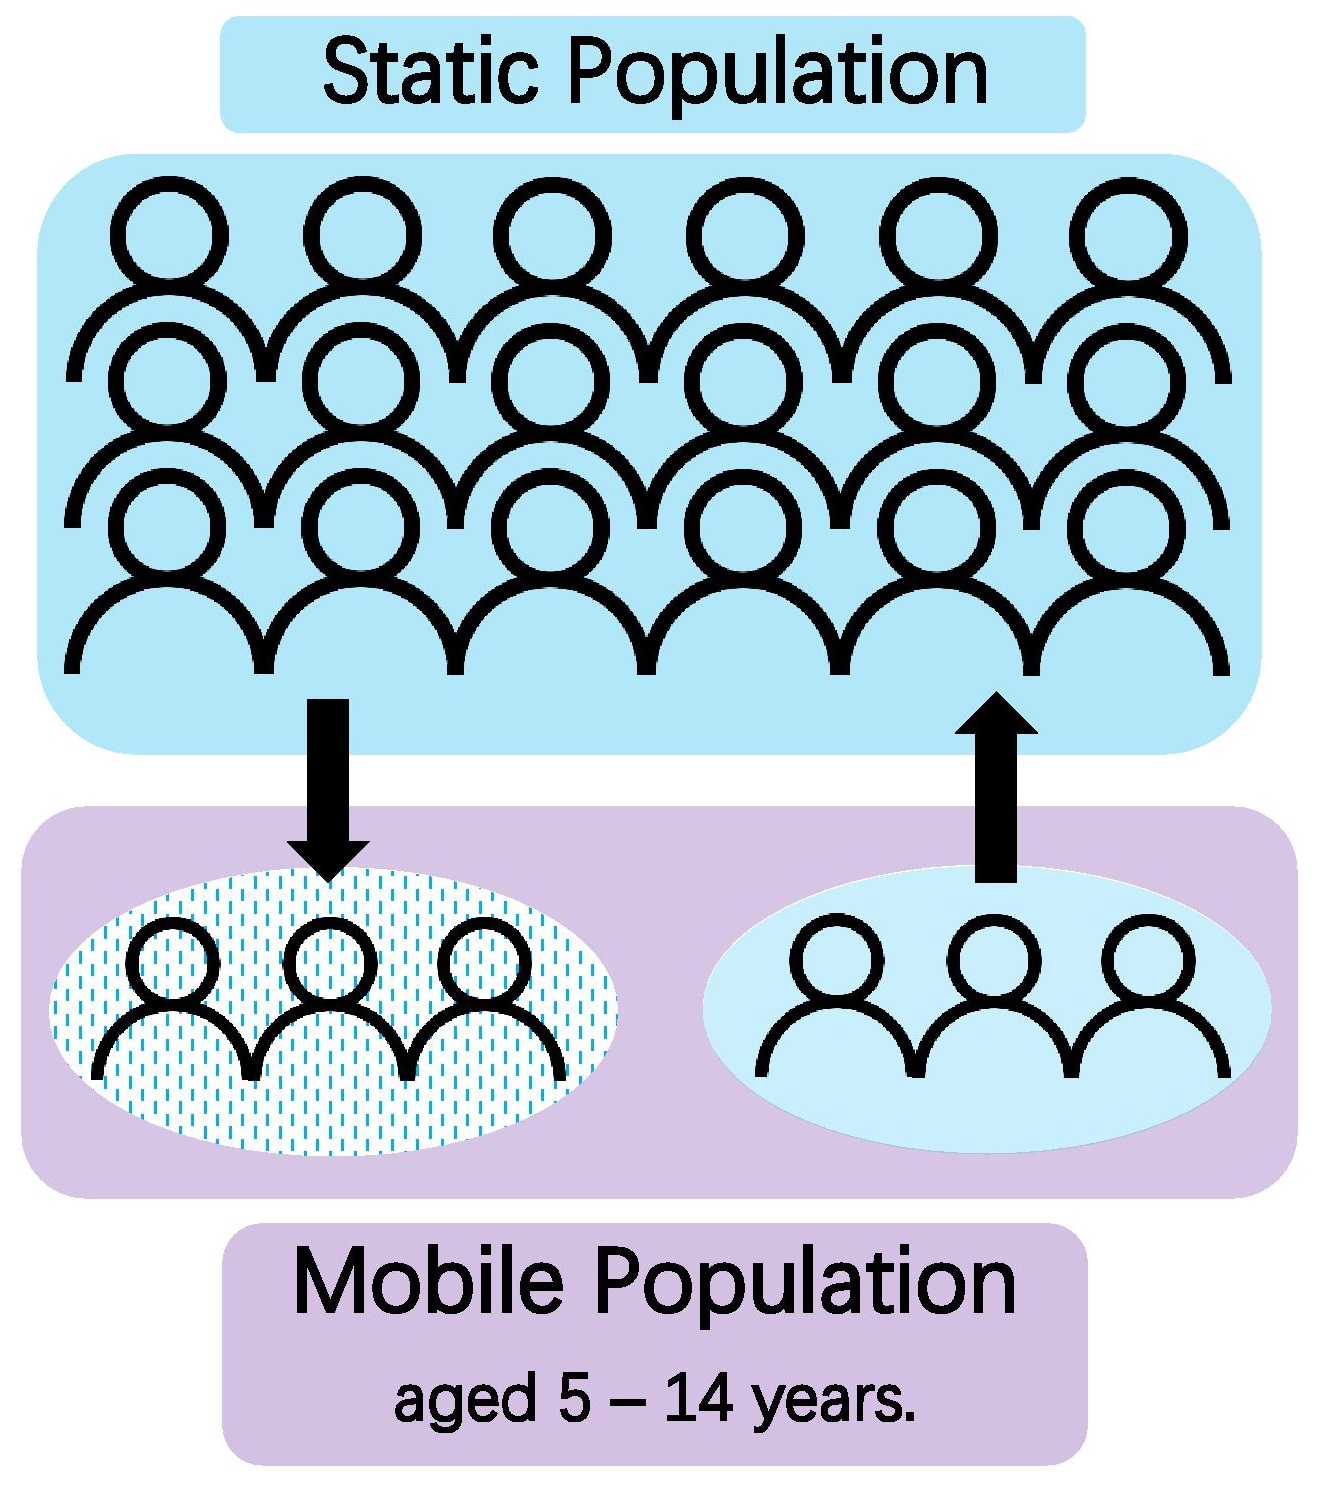 Static Population and Mobile Population